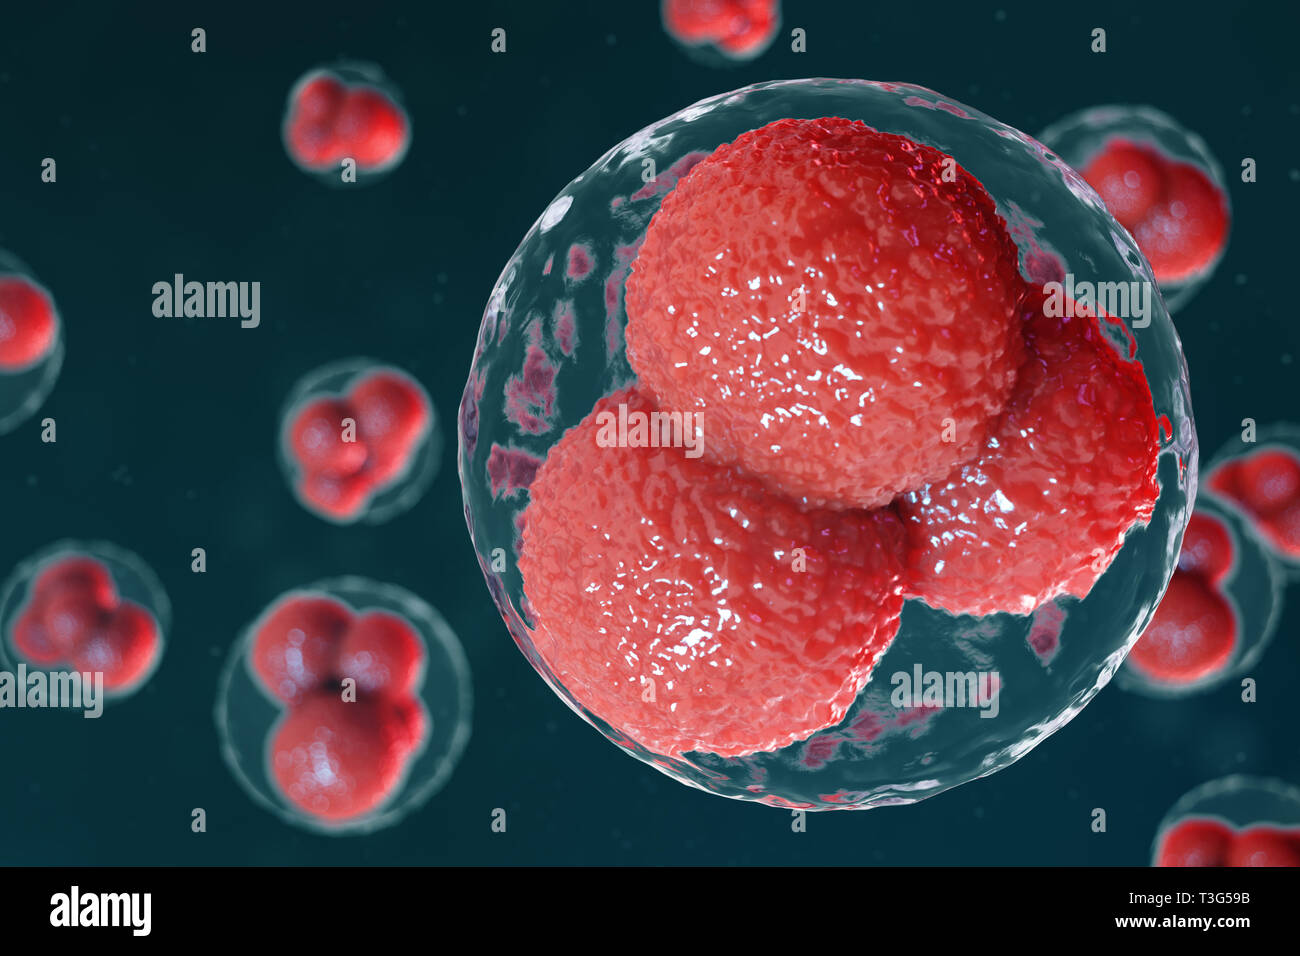 3D illustration egg cells embryo. Embryo cells with red nucleuses in center. Human or animal egg cells. Medicine scientific concept. Development livin Stock Photo